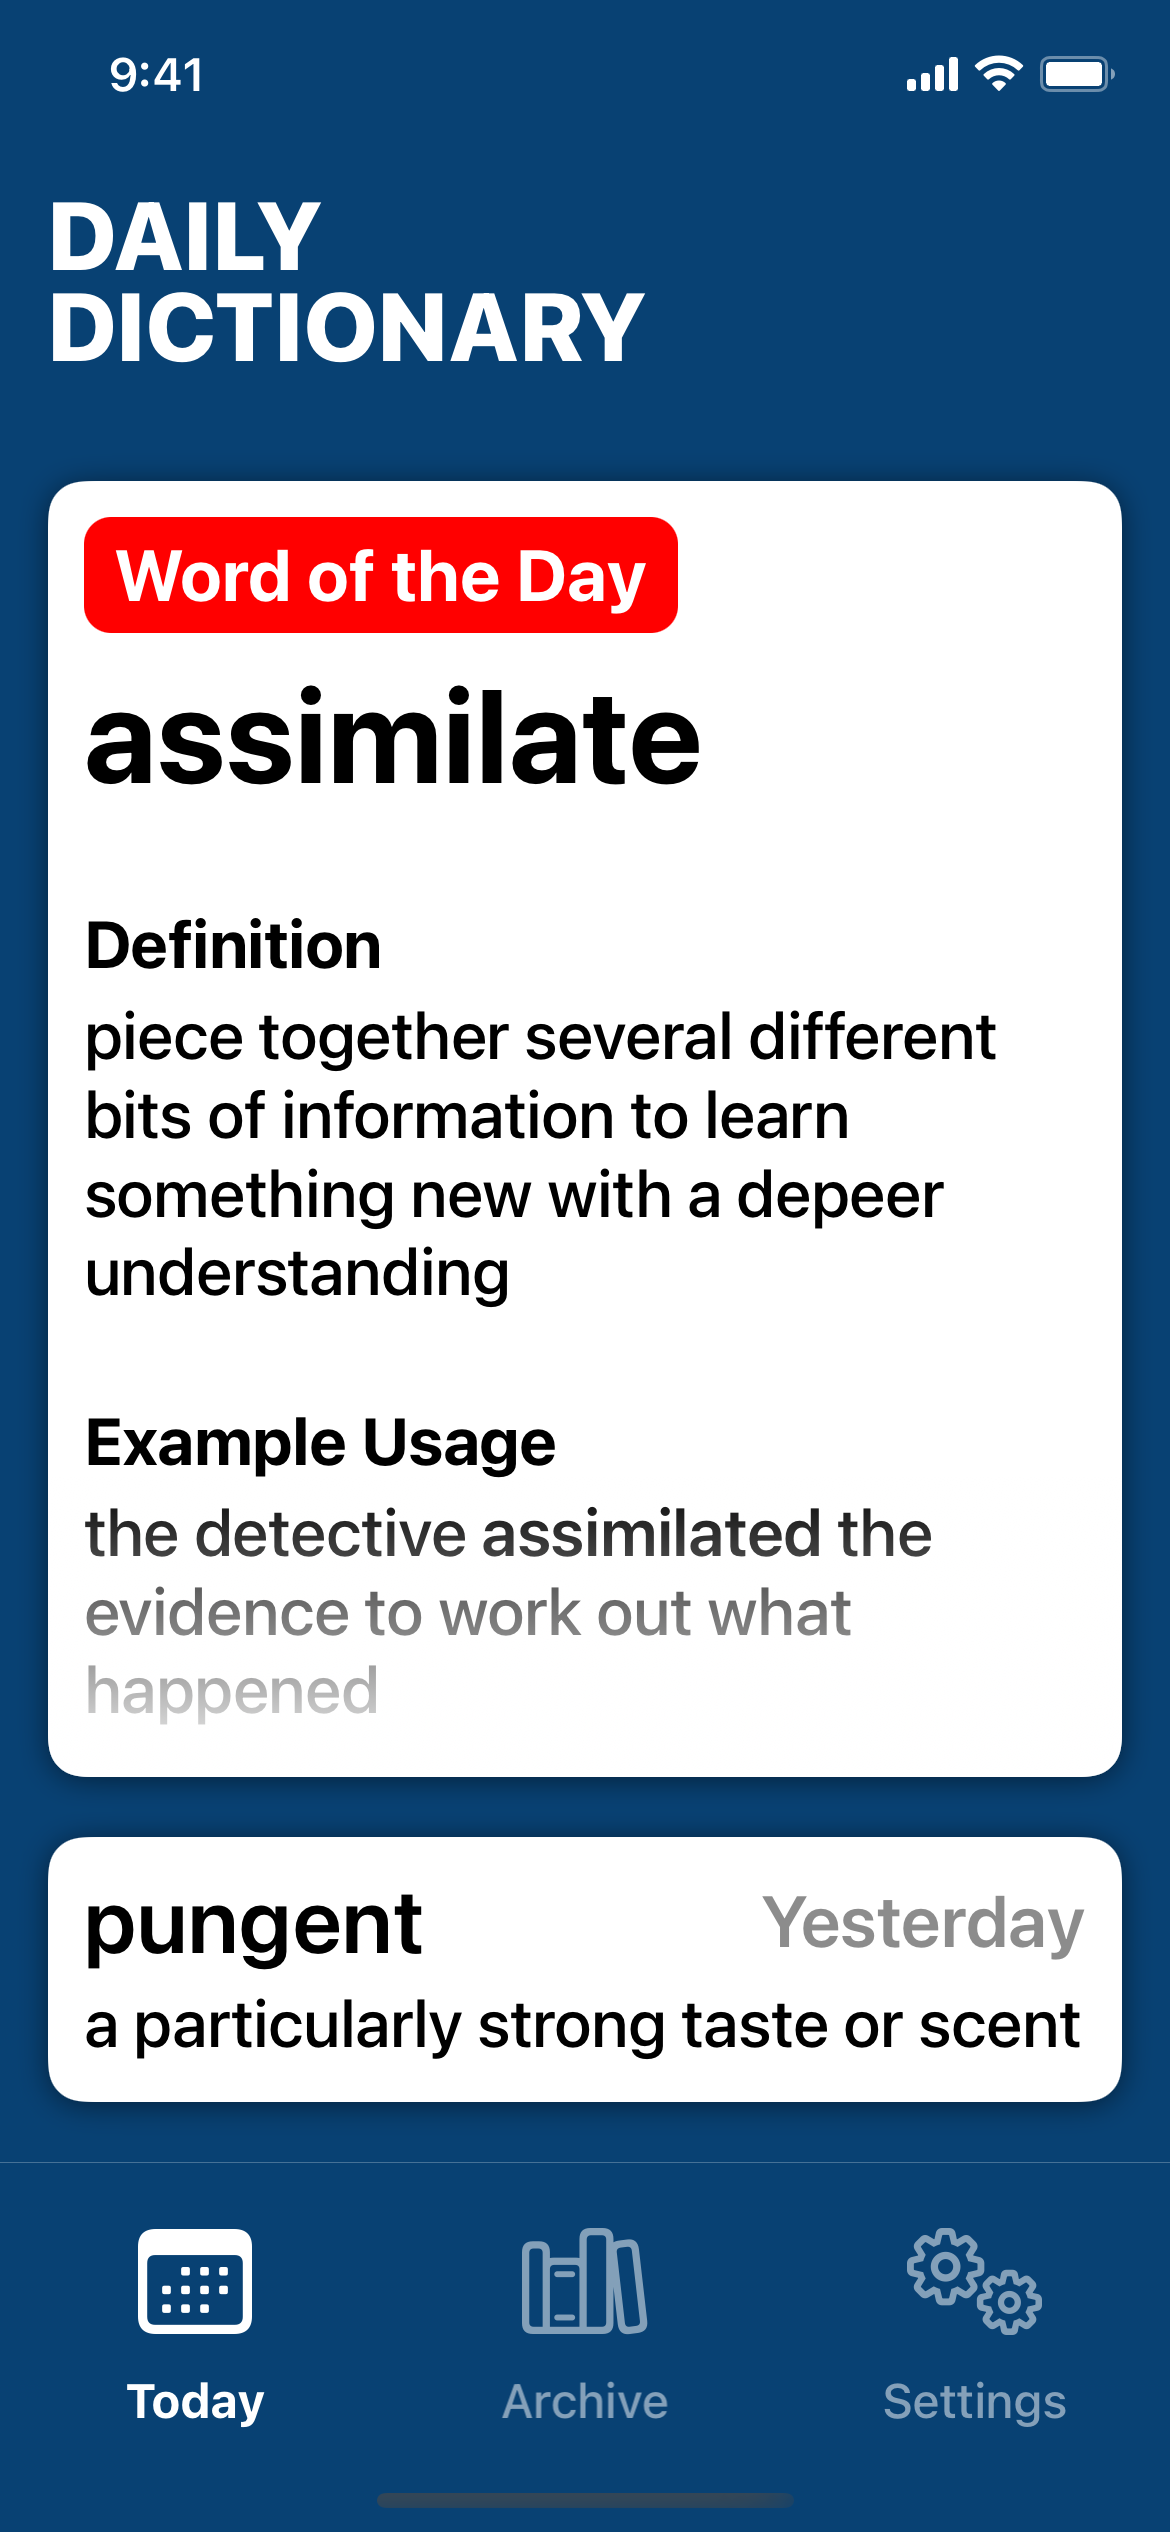 A screenshot of the Daily Dictionary app Today tab, featuring the word of the day.